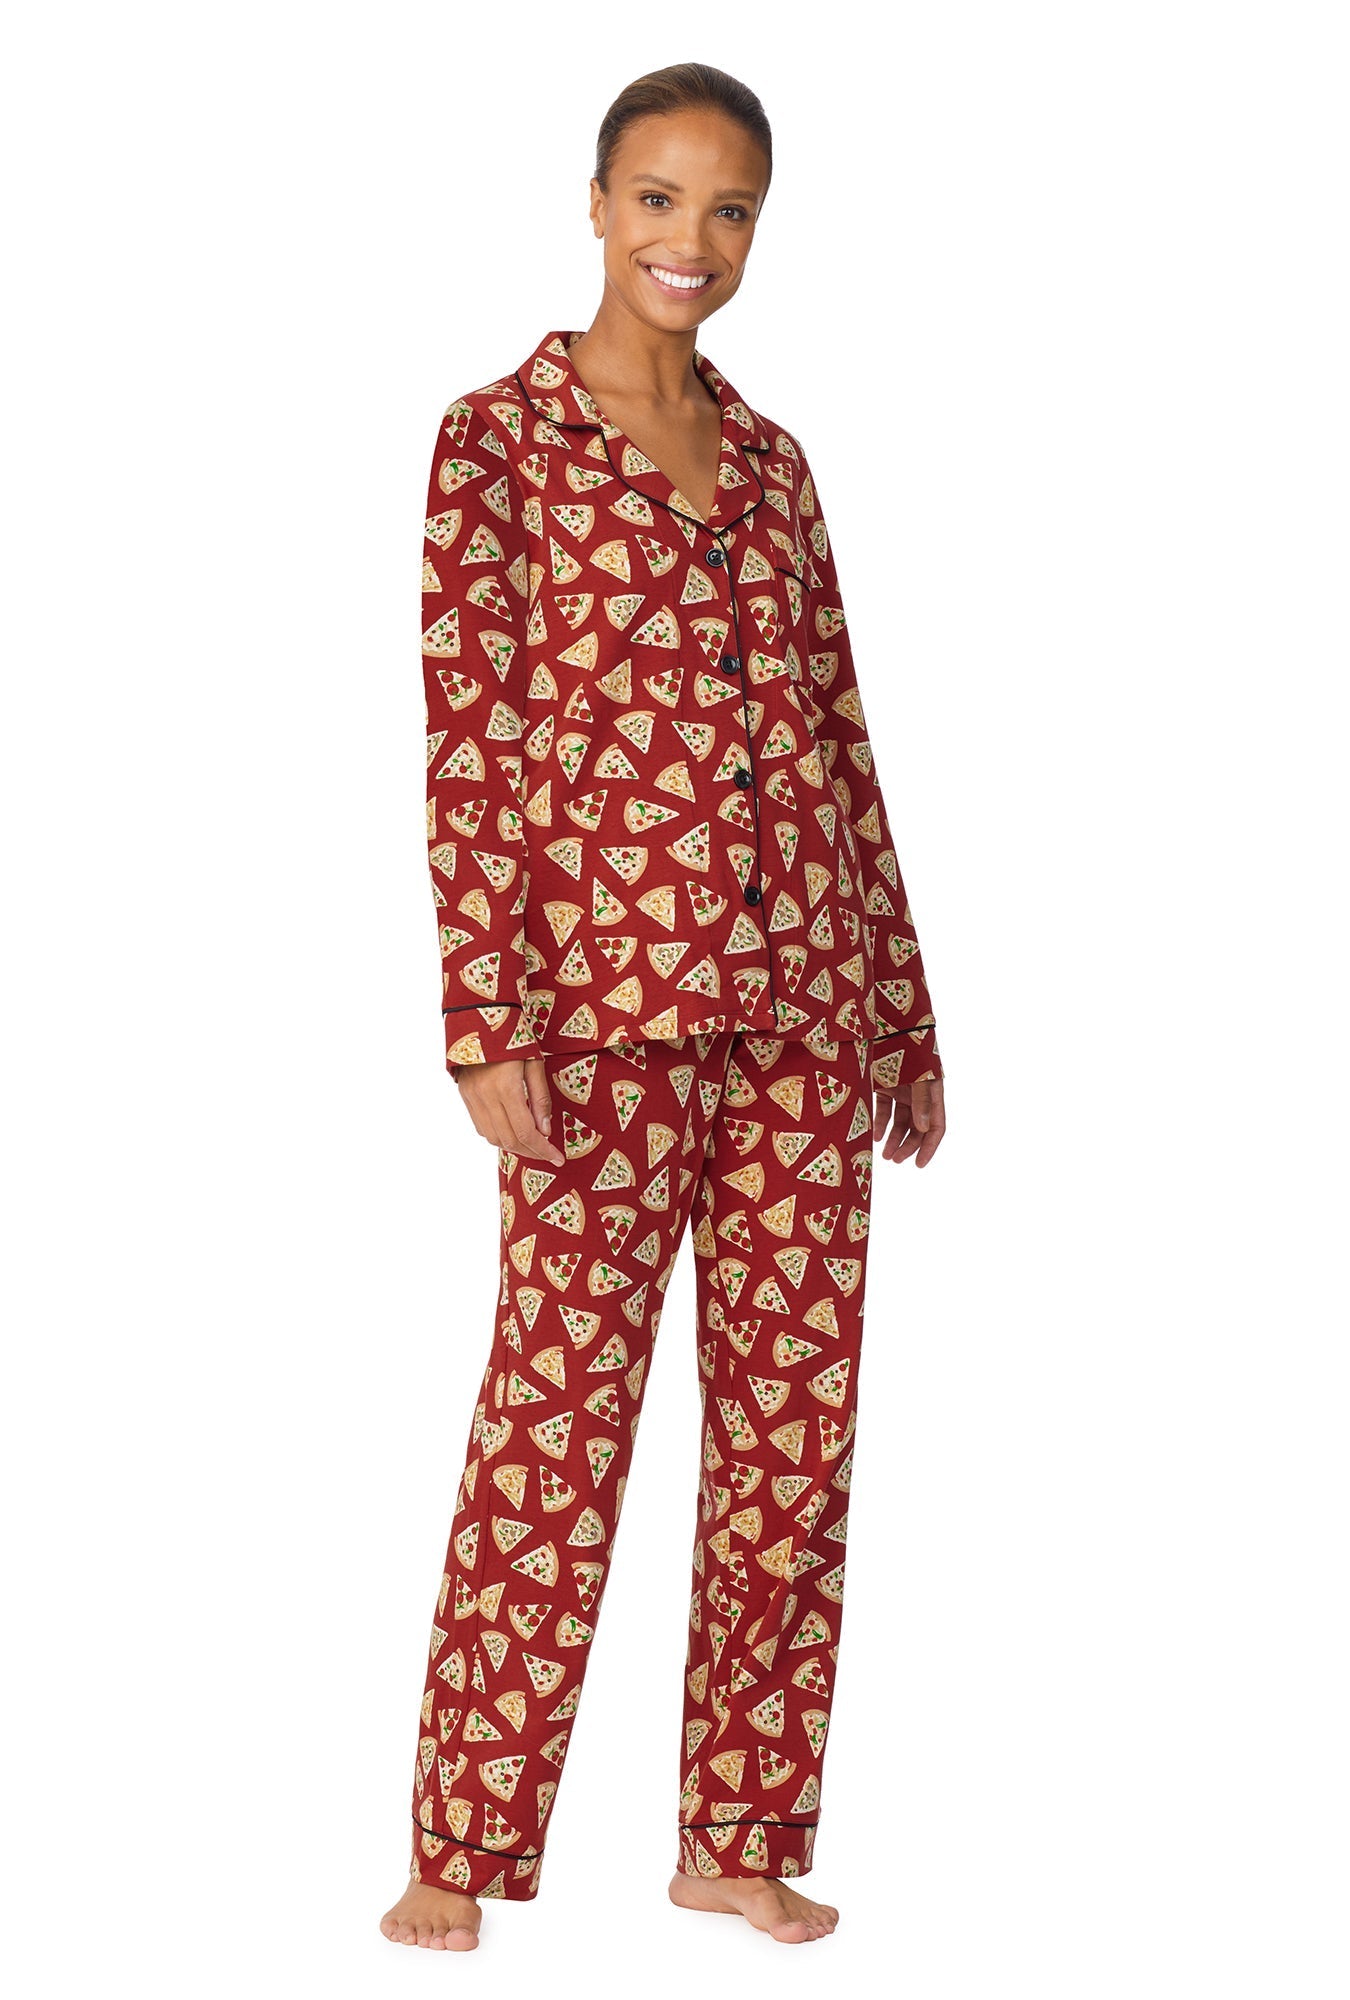 A lady wearing a brown long sleeve pj set with pizza pattern.